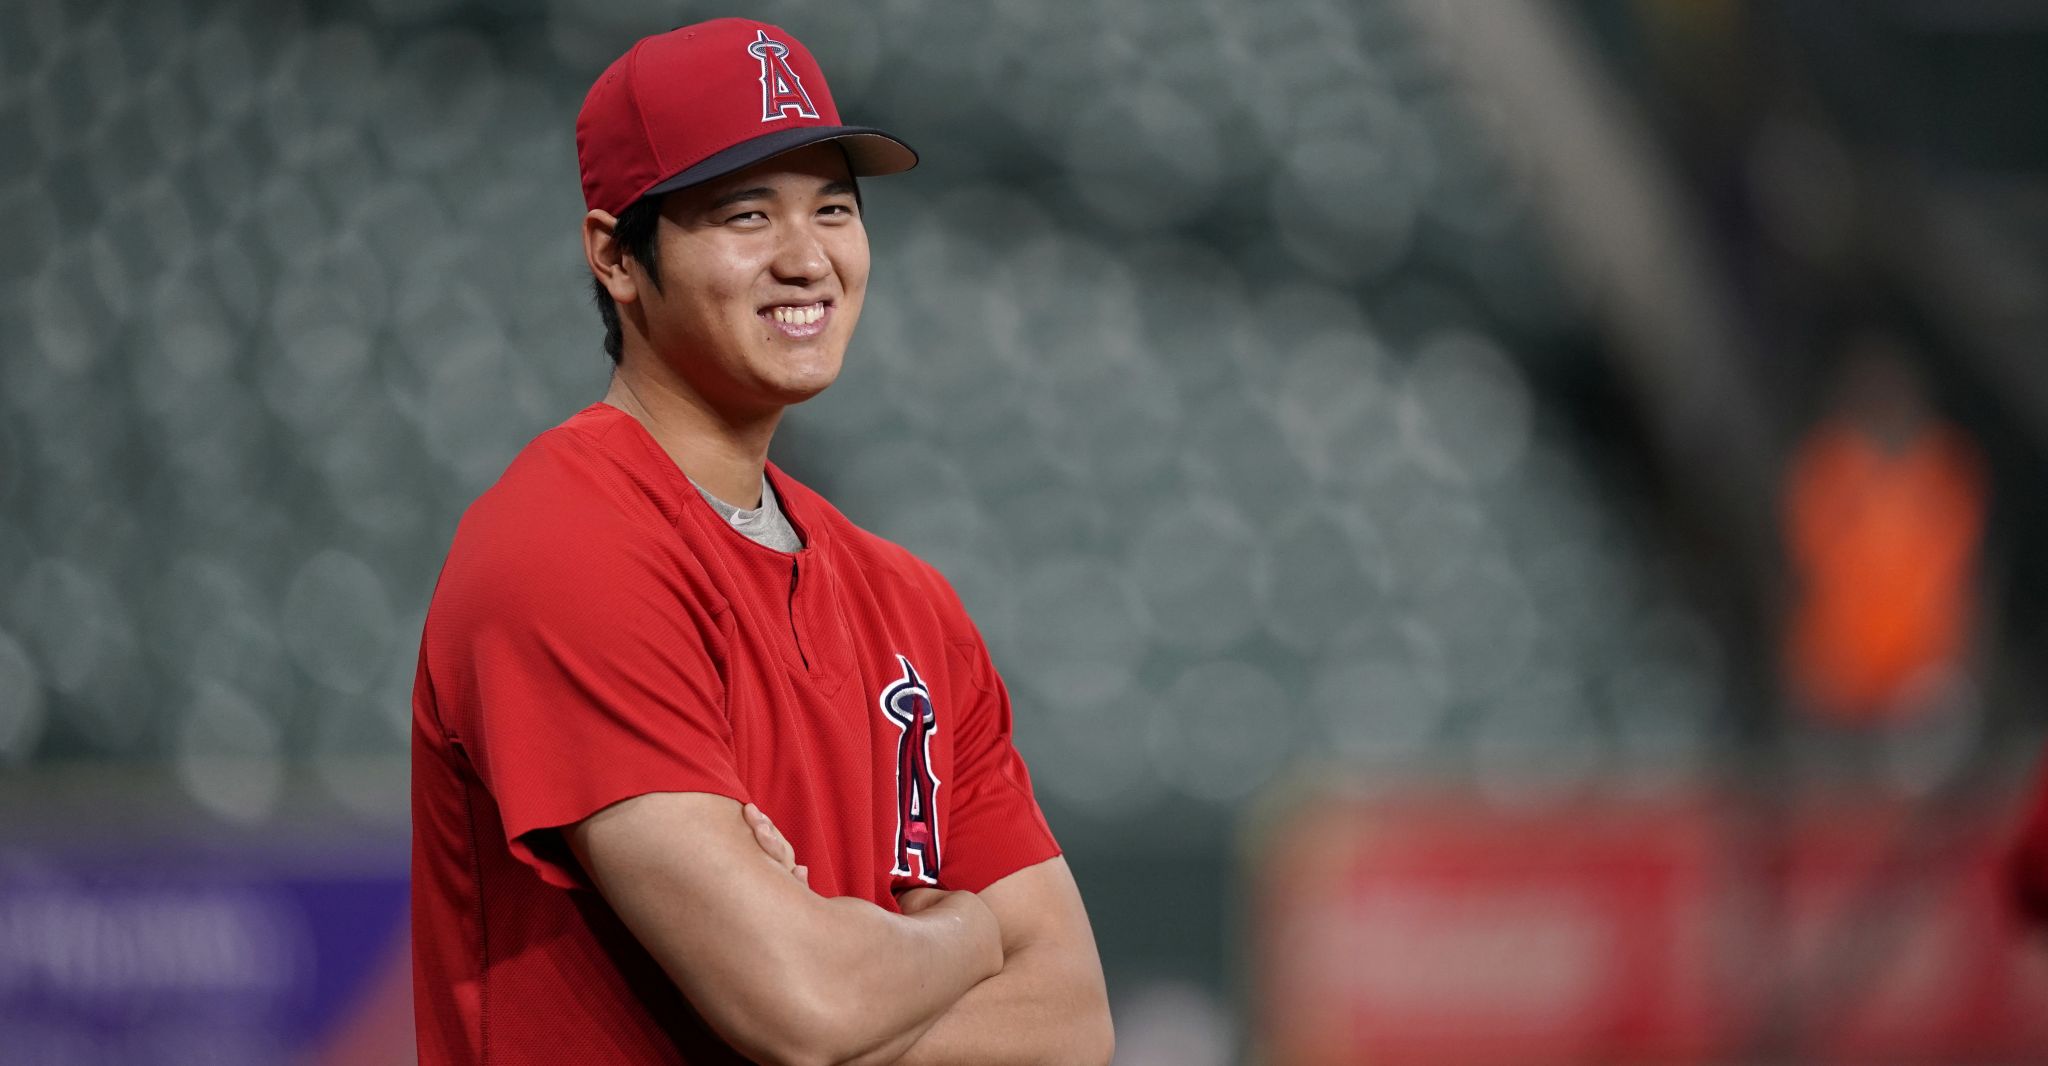 Shohei Ohtani allows 4 earned runs, takes the loss in the Astros' 7-5 win  over the spiraling Angels – NewsNation